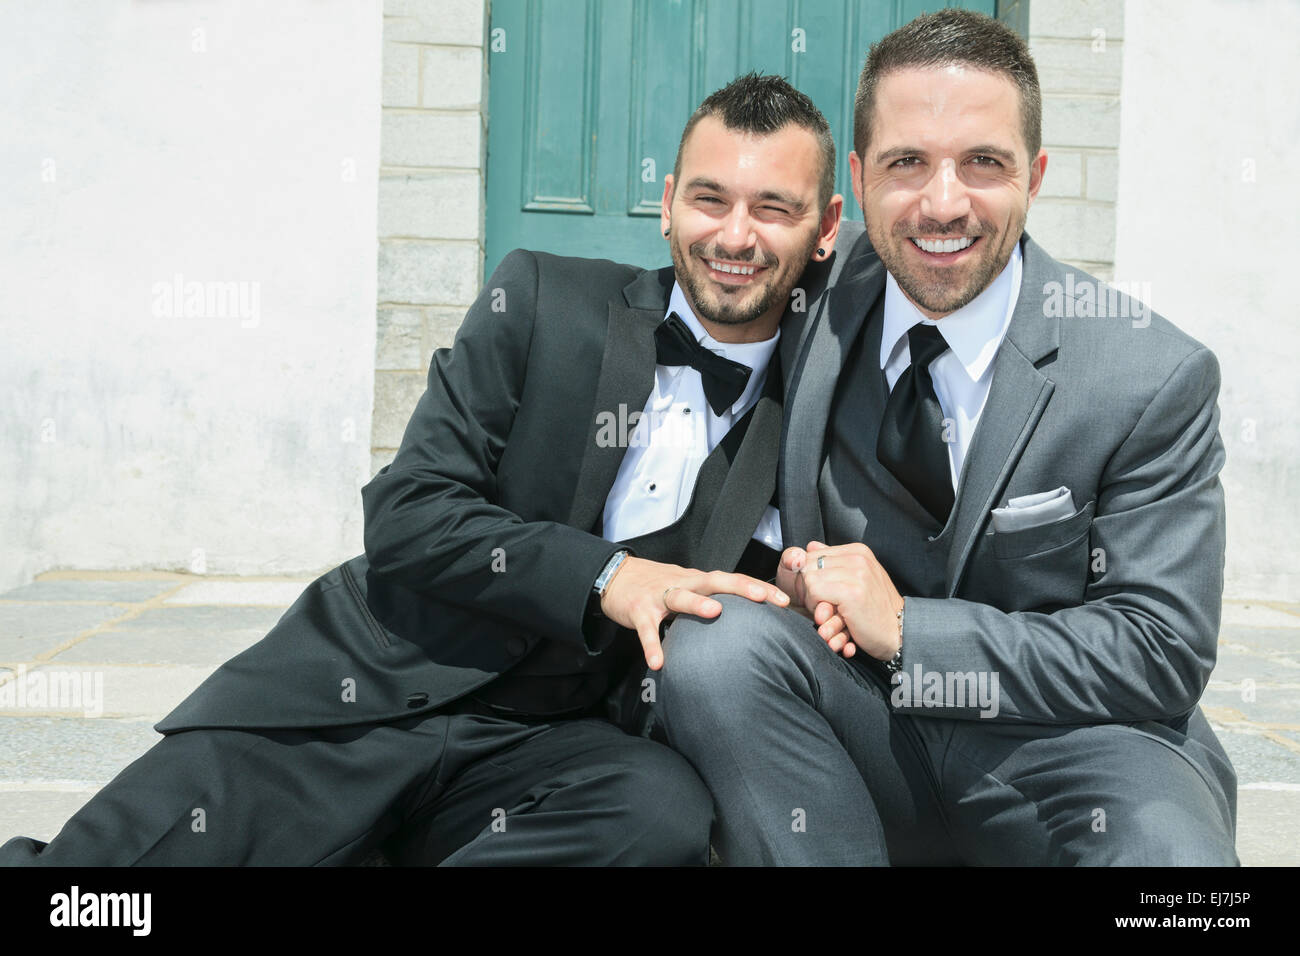 Portrait of a loving gay male couple on their wedding day. Stock Photo